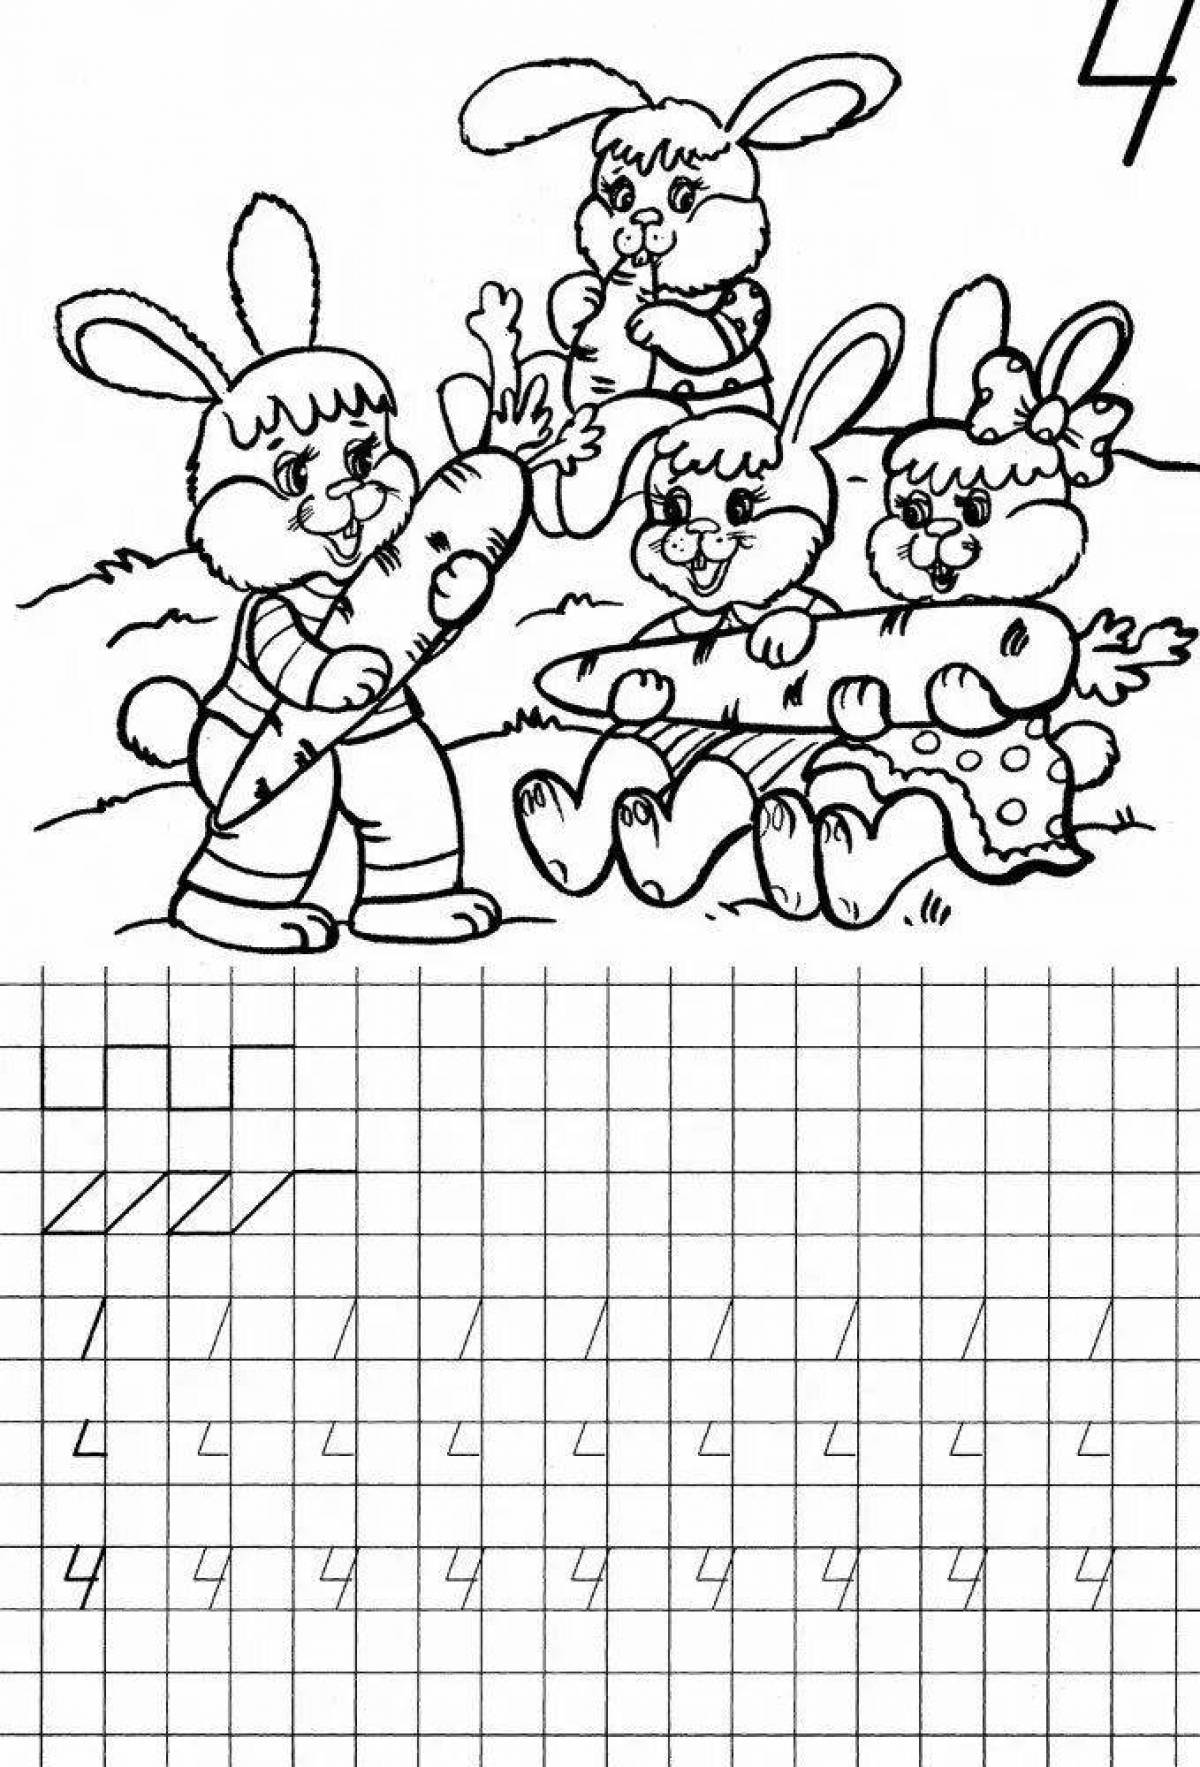 Fun coloring book for preschoolers getting ready for school